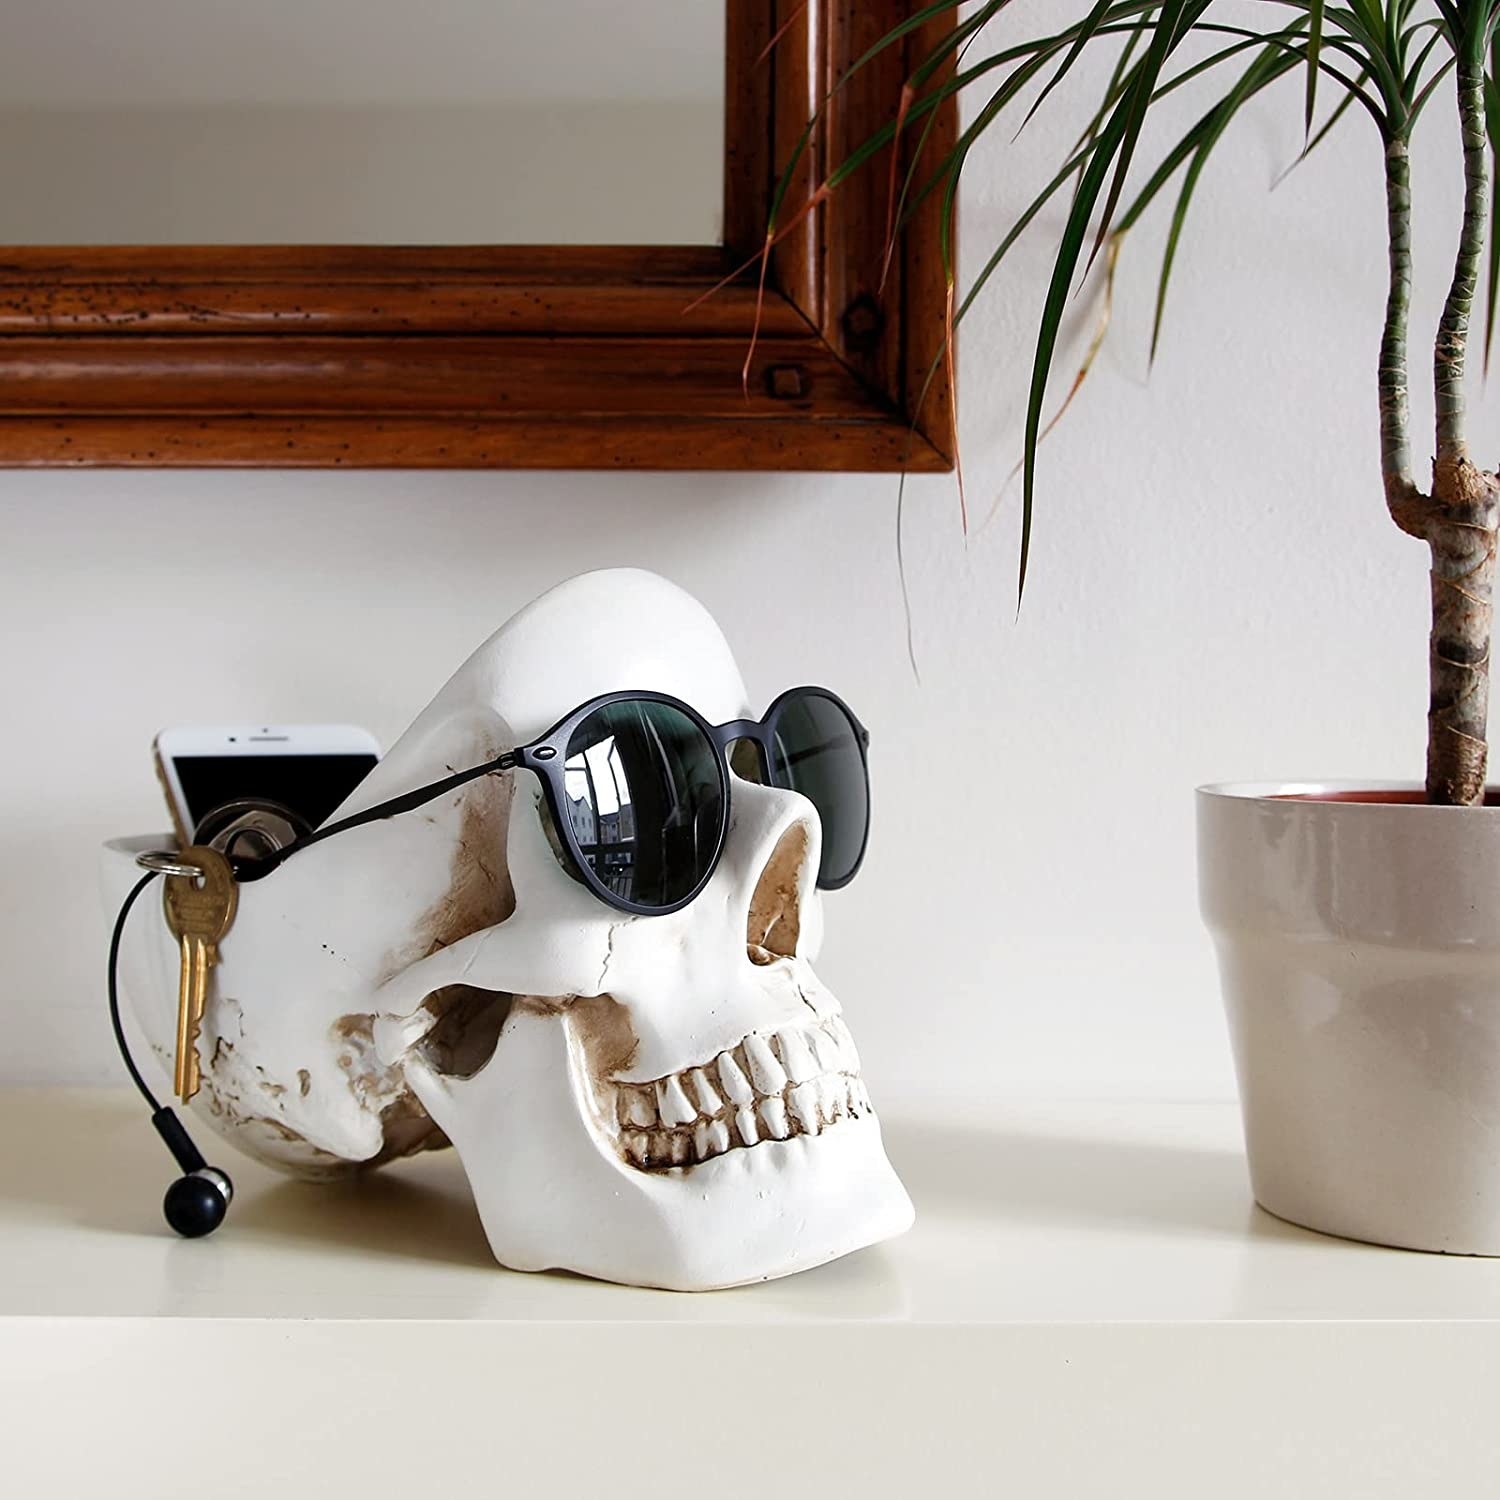 a skull-shaped trinket dish with a phone inside and a pair of sunglasses left on the face